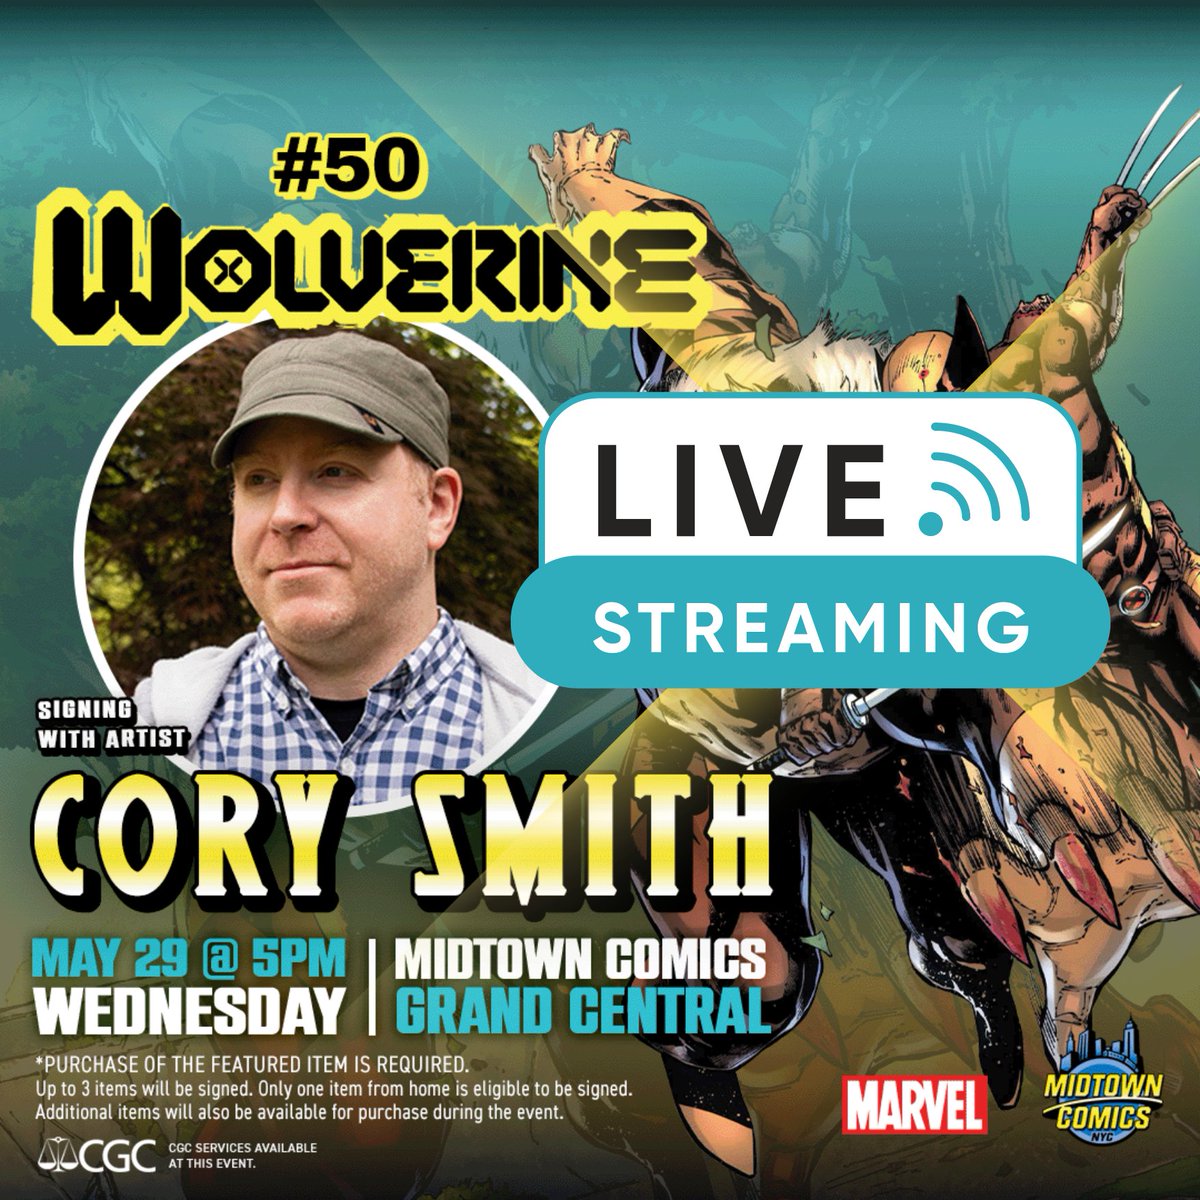 JOIN US TOMORROW @ MIDTOWN COMICS #GRANDCENTRAL for a signing with #artist #CorySmith!

Can't make it to the signing? 

Join us LIVE on Whatnot on WED MAY 29 @ 5 pm for #giveaway , ask questions and get a signed book for your collection!

👉Save the link: ow.ly/5h1w50RZiKq